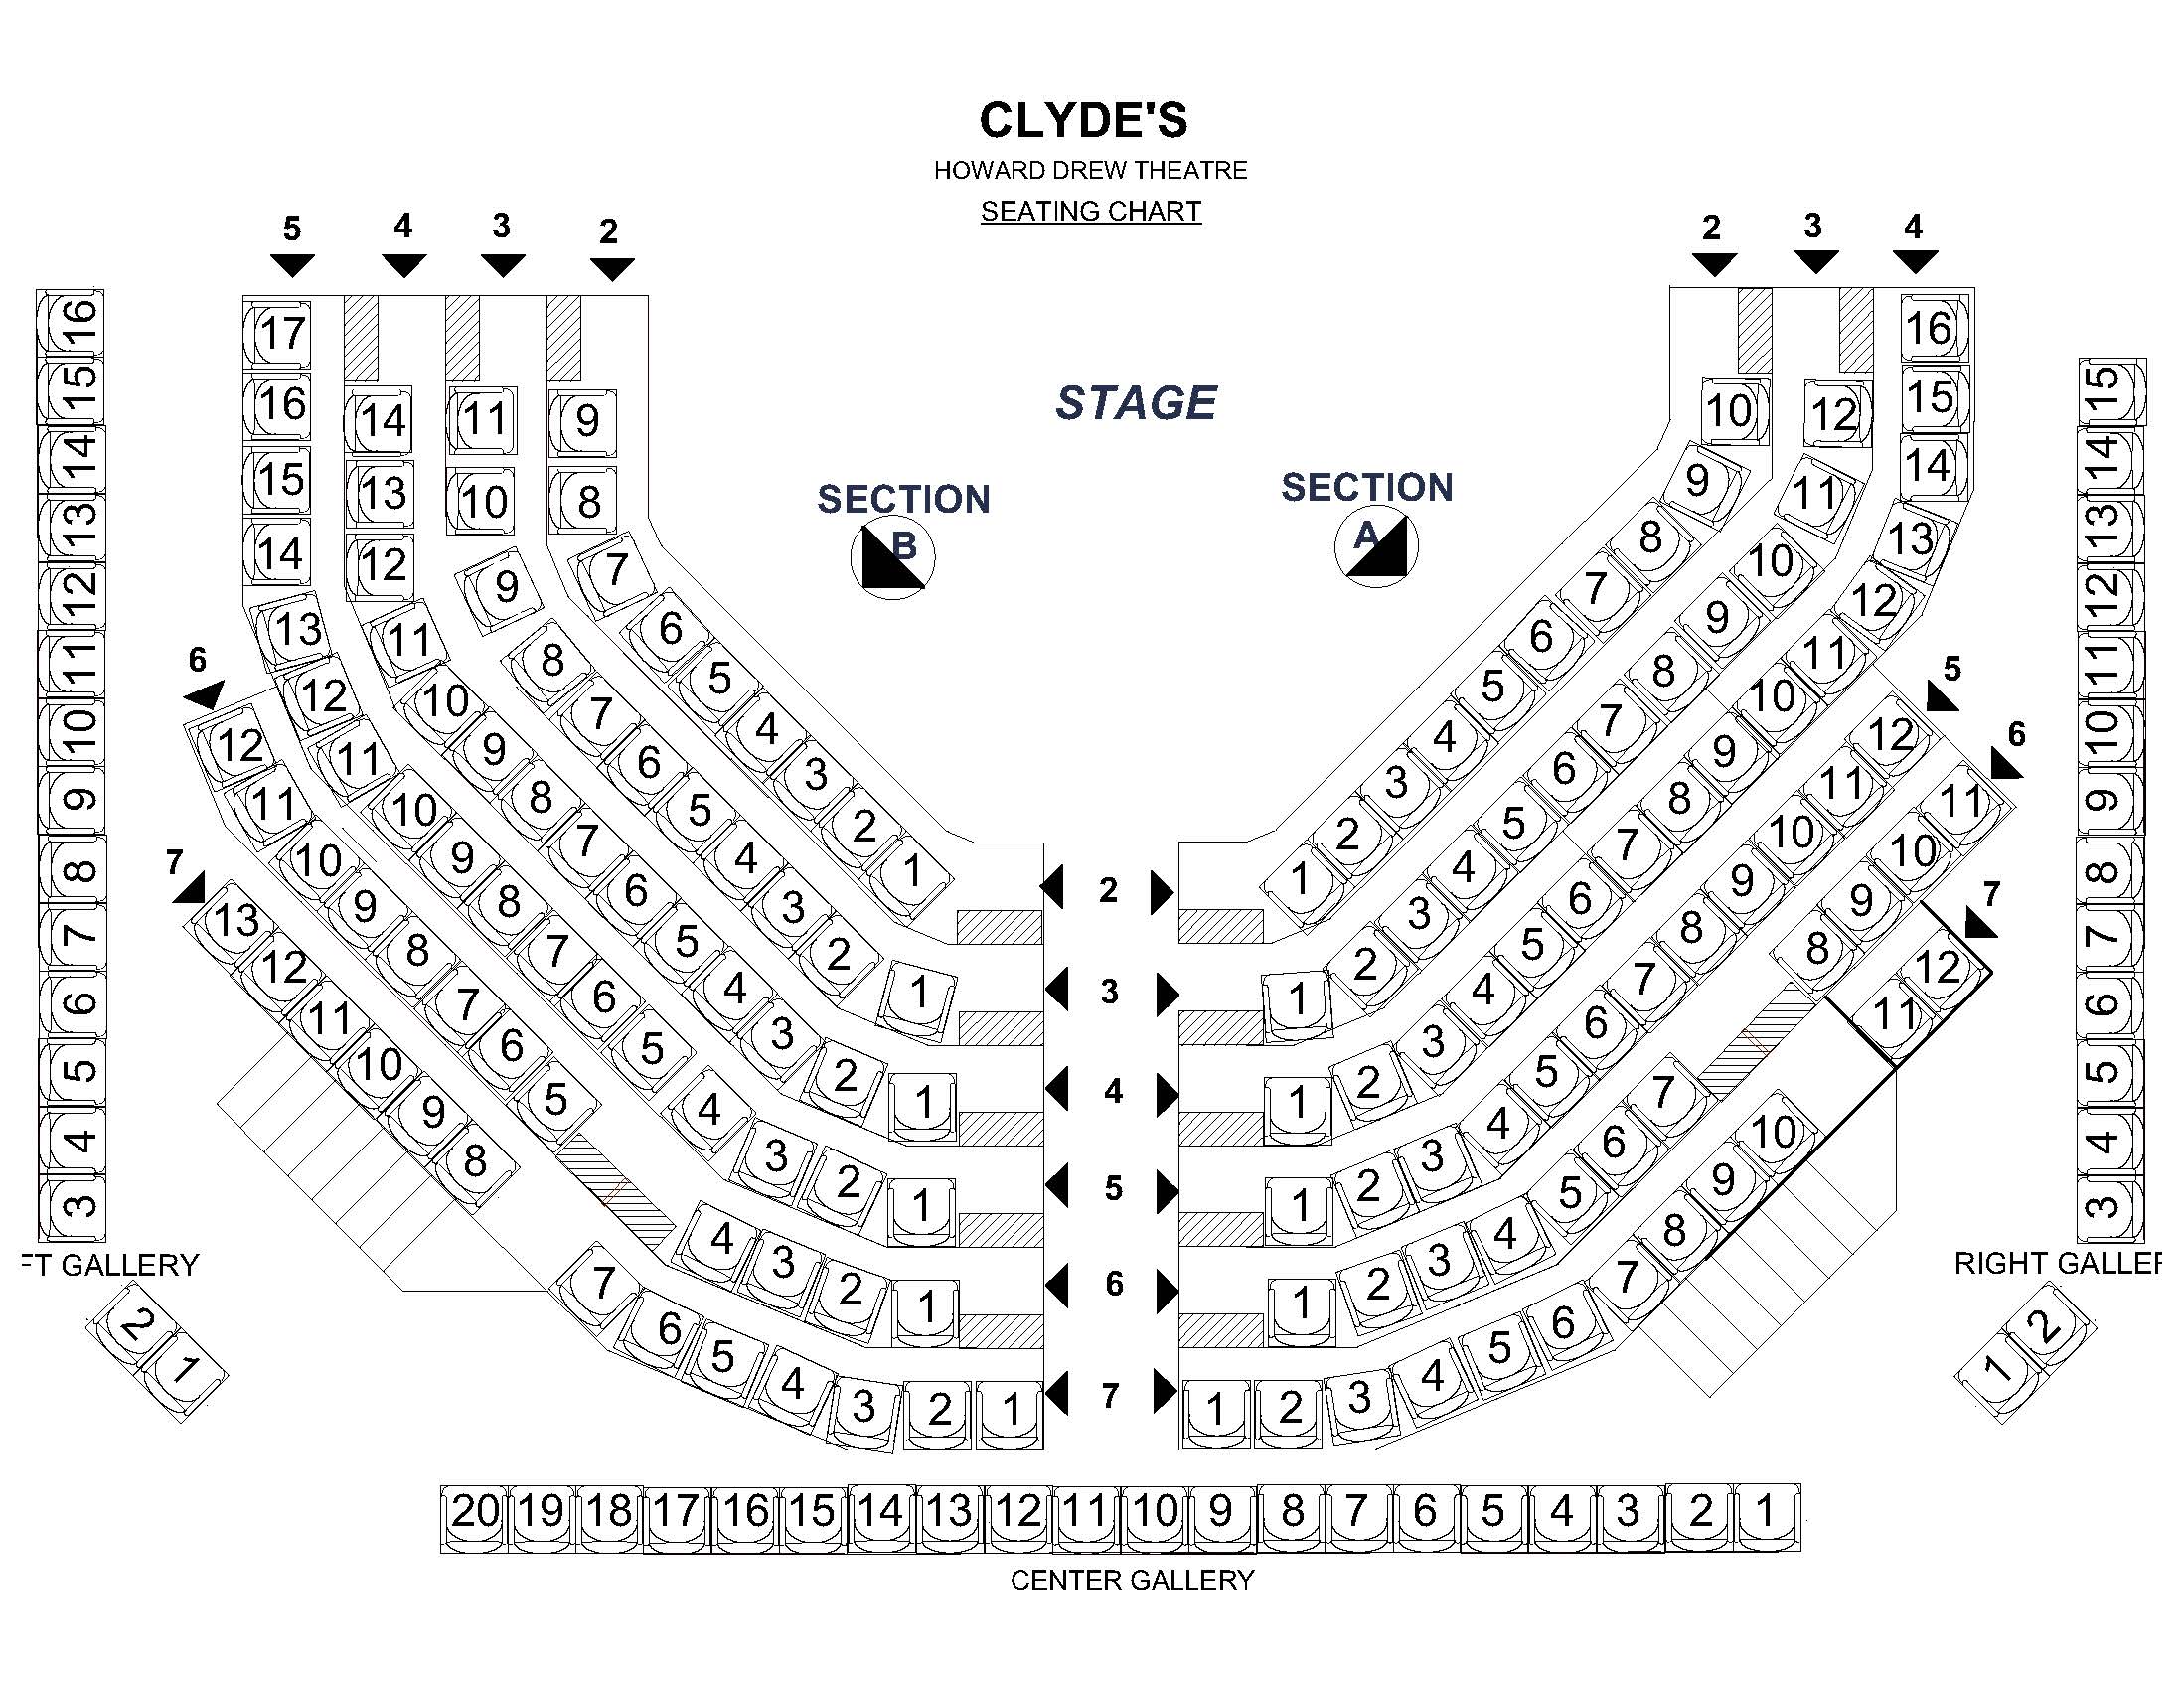 Howard Drew Theatre Seating Chart for CLYDE'S